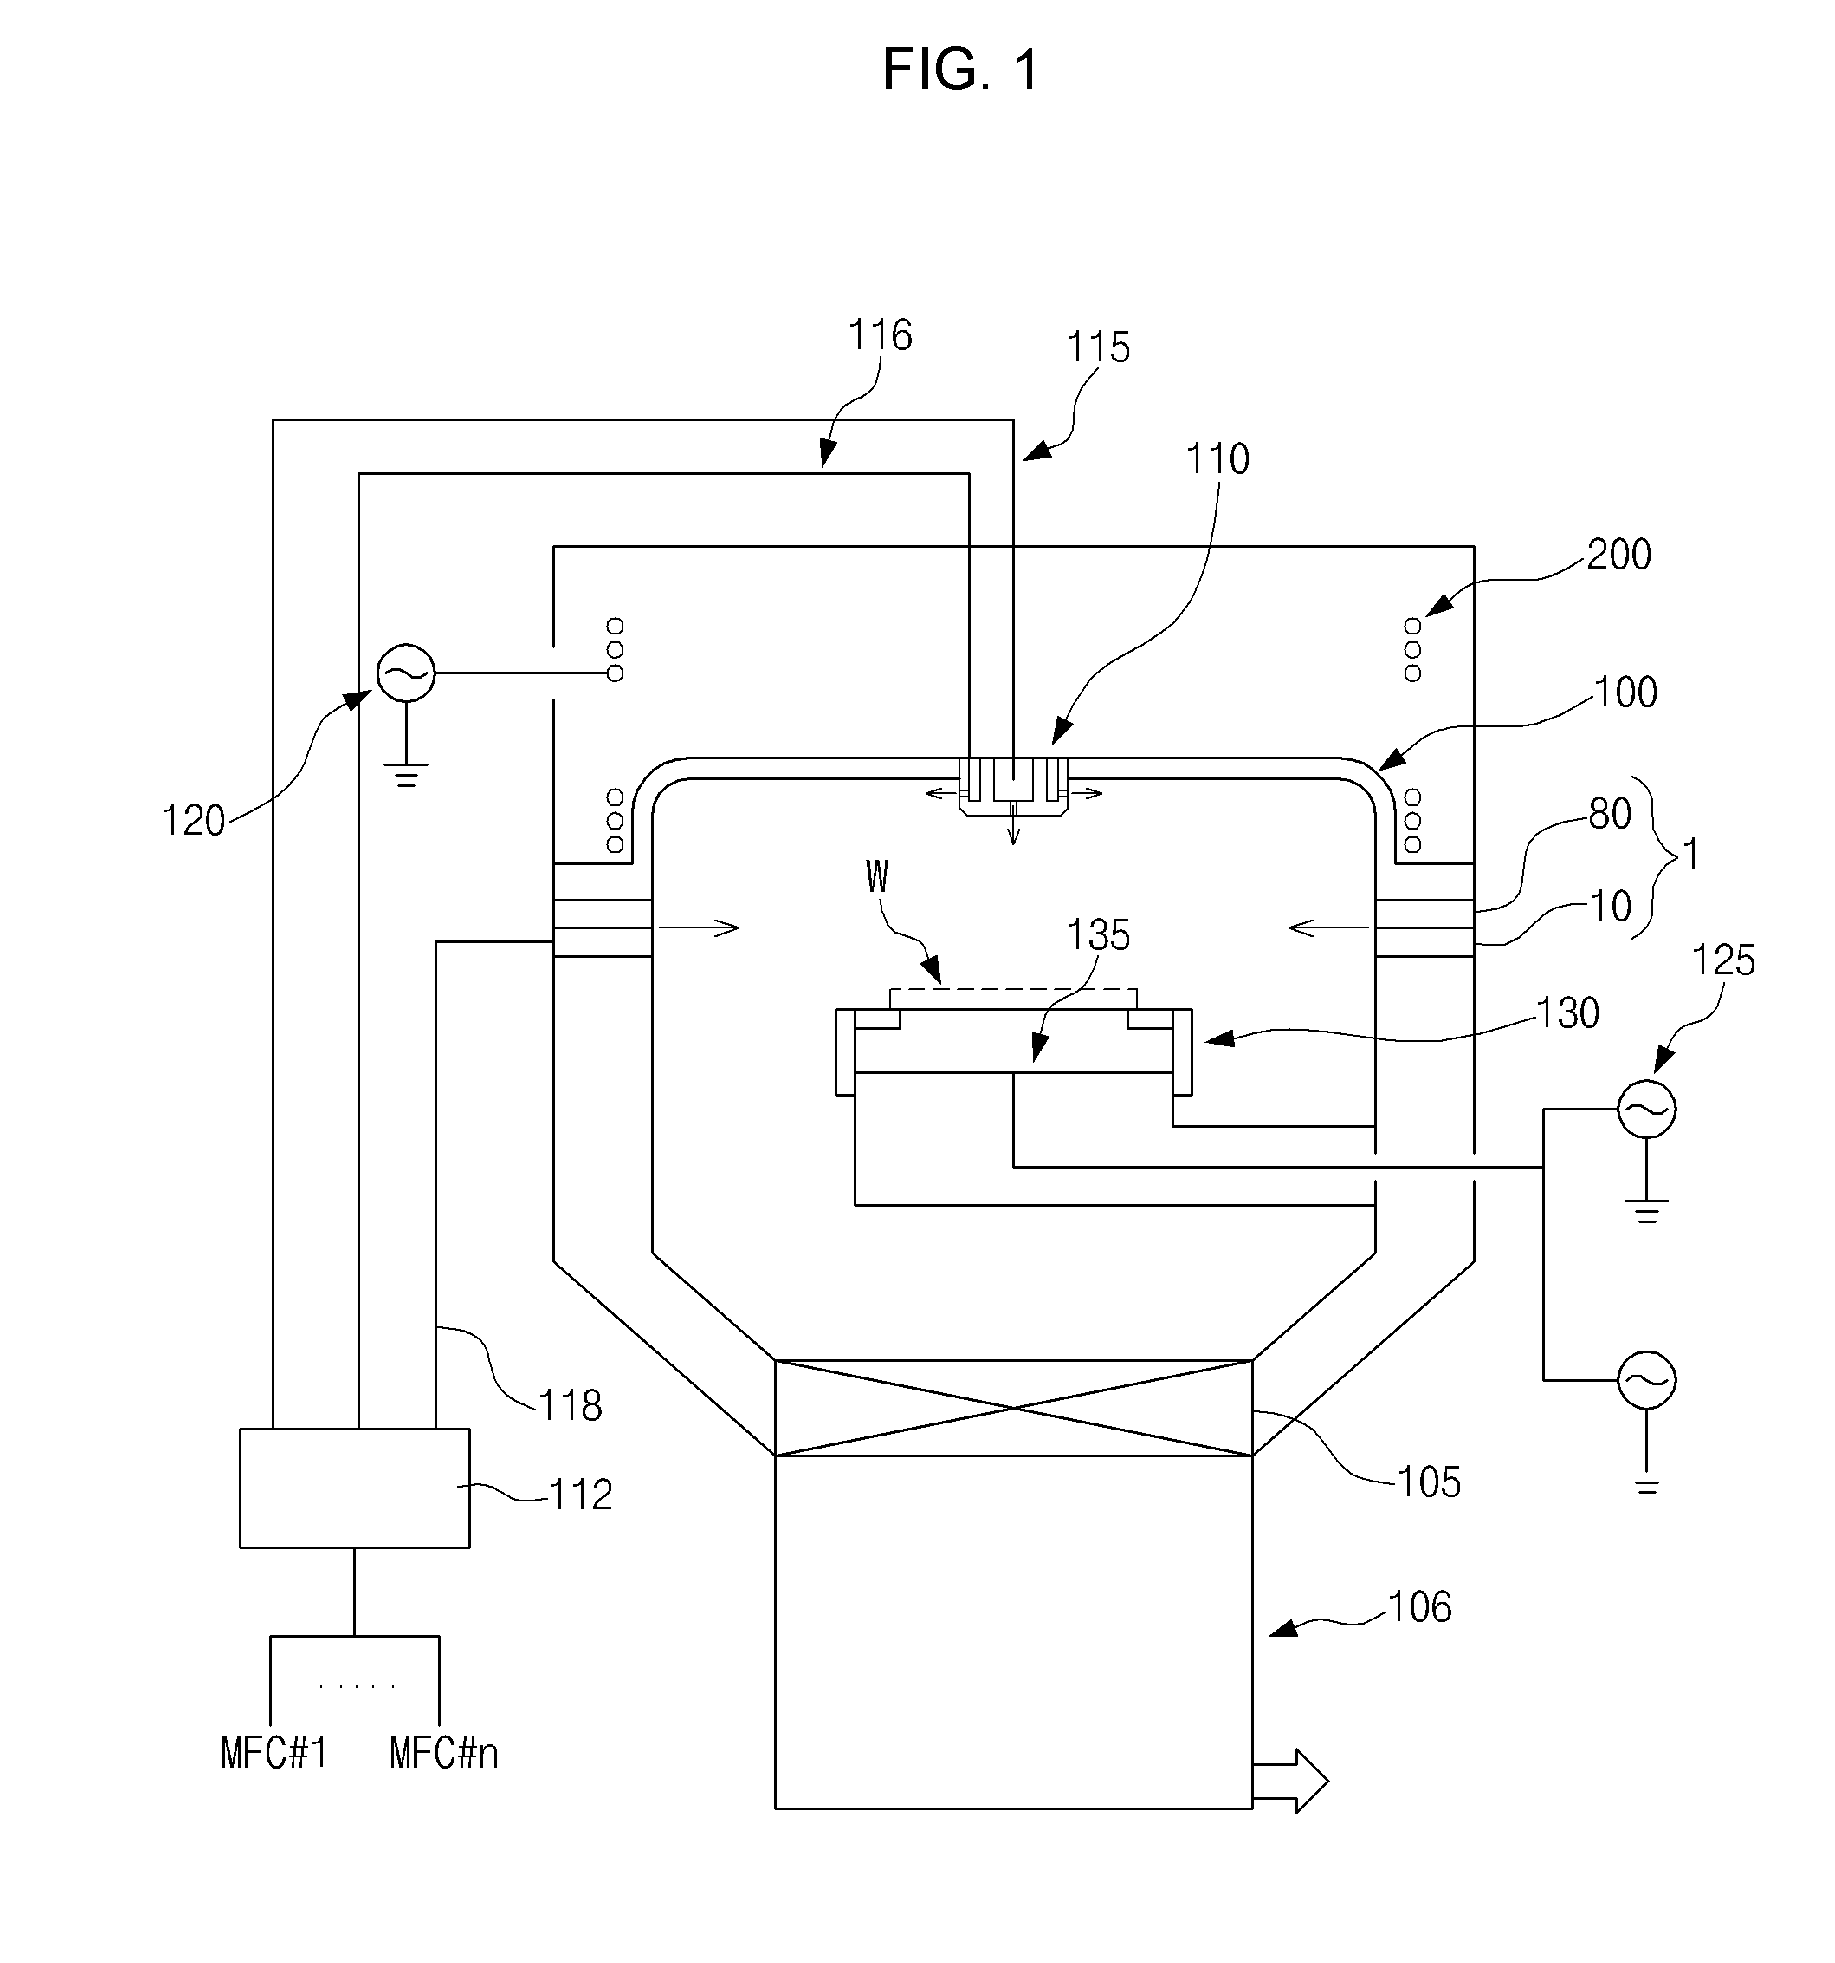 Side gas injector for plasma reaction chamber